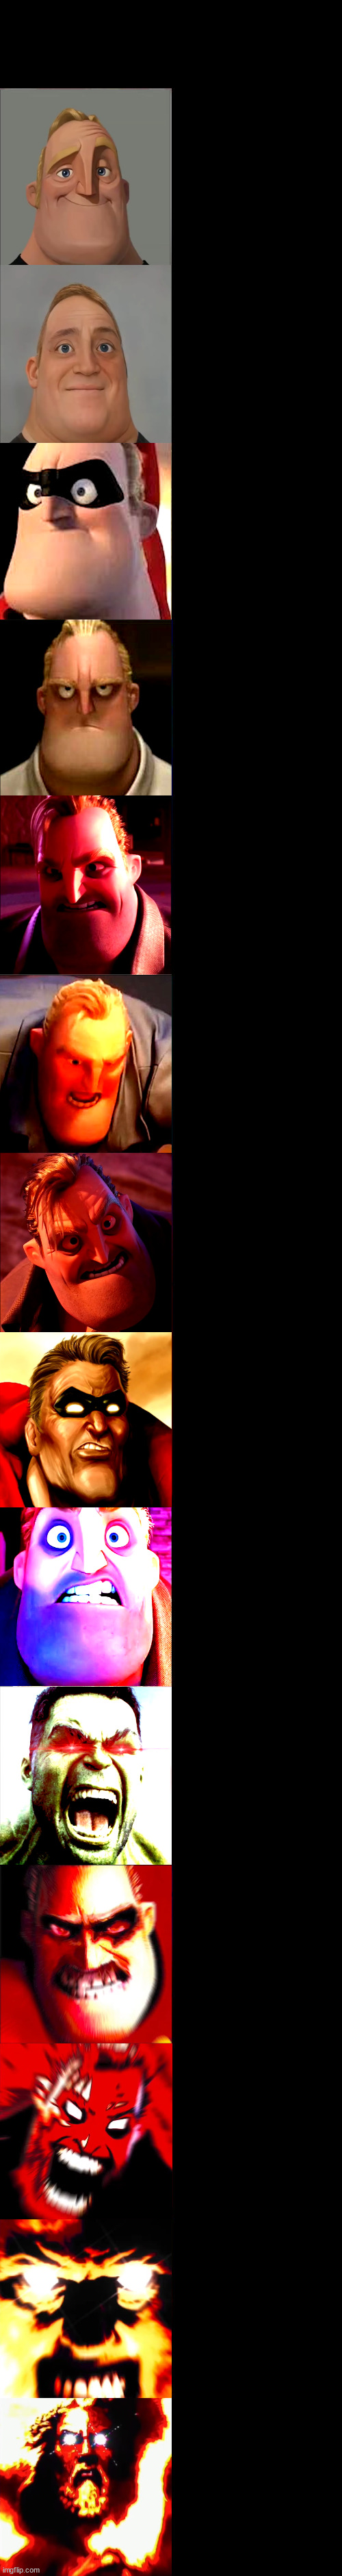 Mr. Incredible Becoming Angry Extended Blank Meme Template